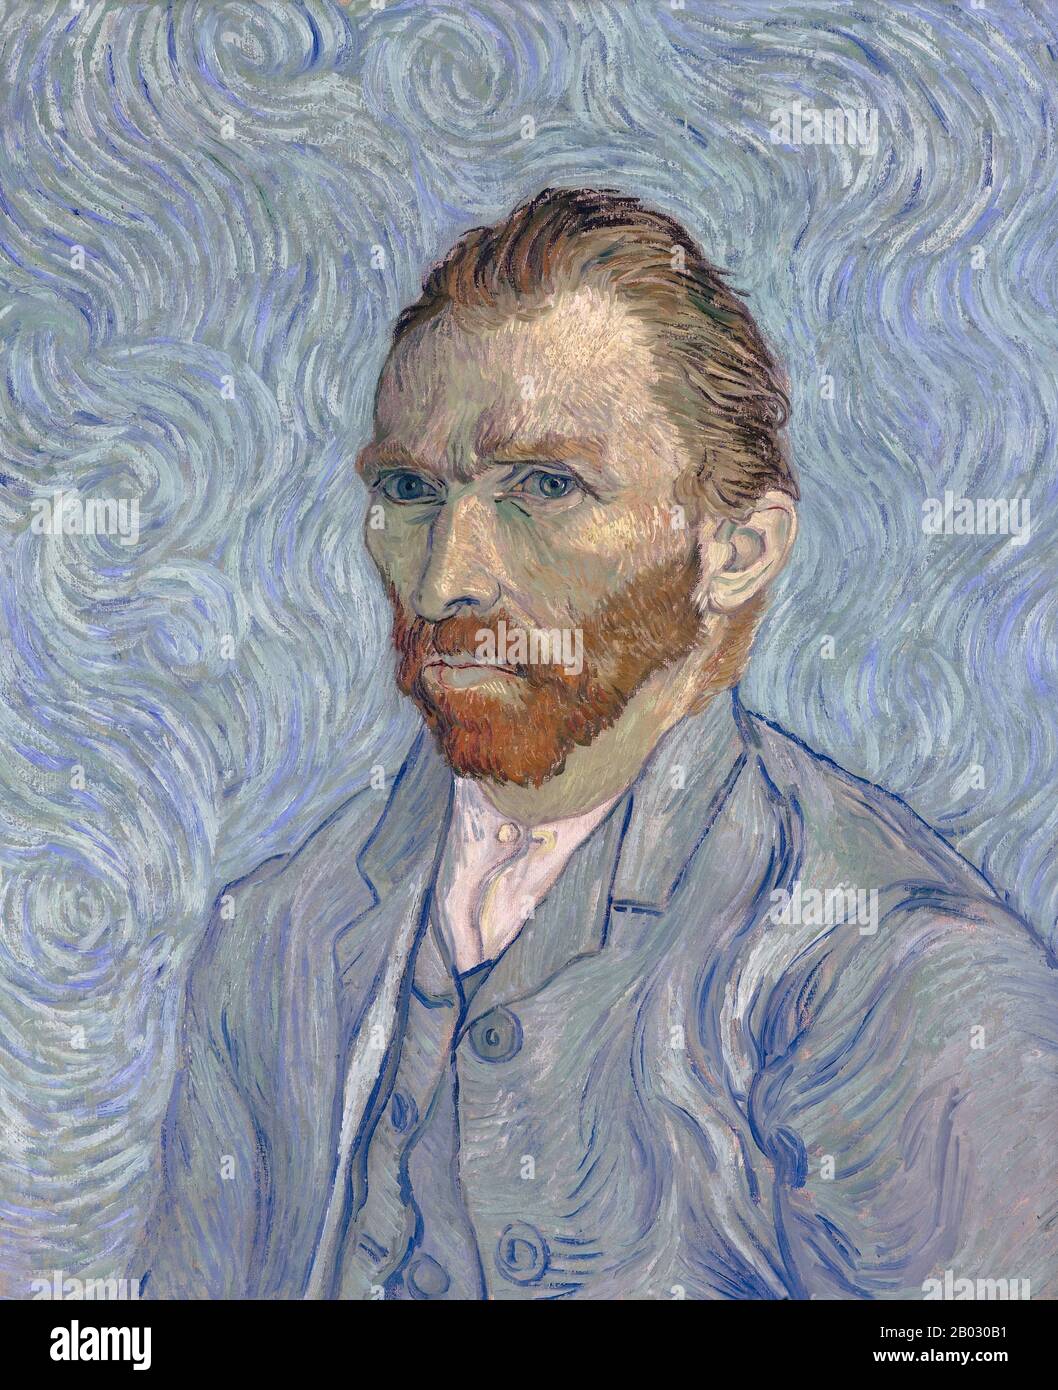 Vincent Willem van Gogh (30 March 1853 – 29 July 1890) was a Post-Impressionist painter. He was a Dutch artist whose work had a far-reaching influence on 20th century art. His output includes portraits, self portraits, landscapes and still lifes of cypresses, wheat fields and sunflowers.  He drew as a child but did not paint until his late twenties; he completed many of his best-known works during the last two years of his life. In just over a decade, he produced more than 2,100 artworks, including 860 oil paintings and more than 1,300 watercolors, drawings, sketches and prints.  This painting Stock Photo